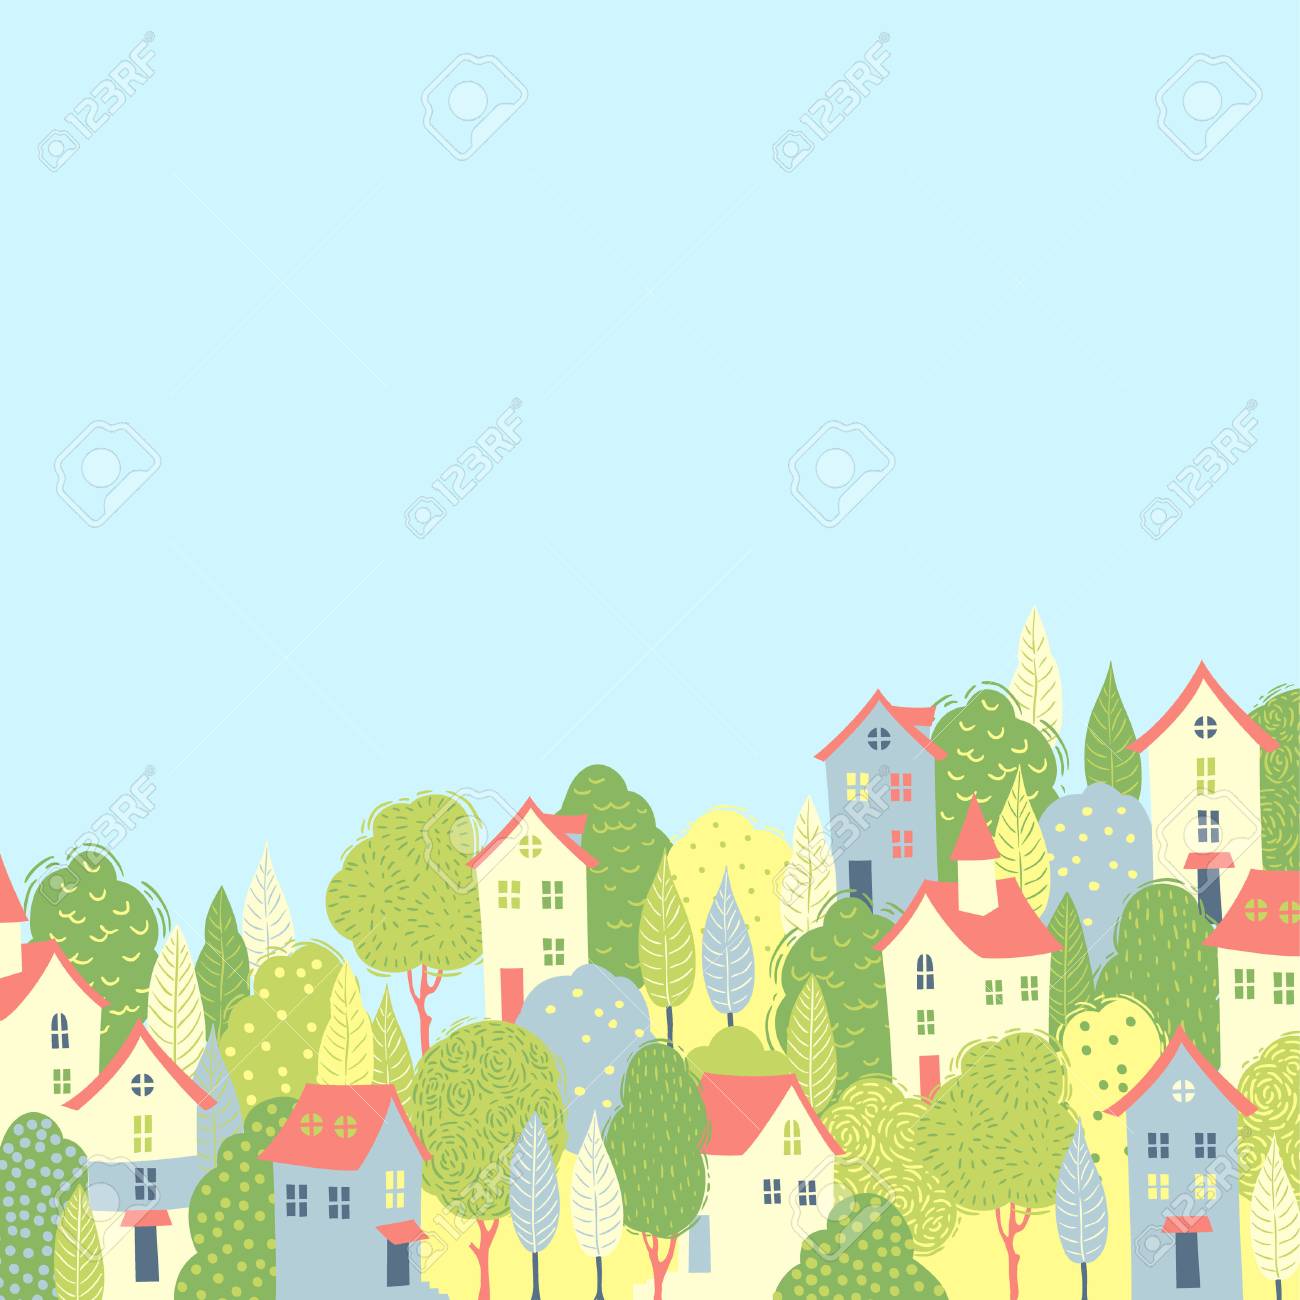 Cute Houses In The Green Trees Spring Background For Your Design